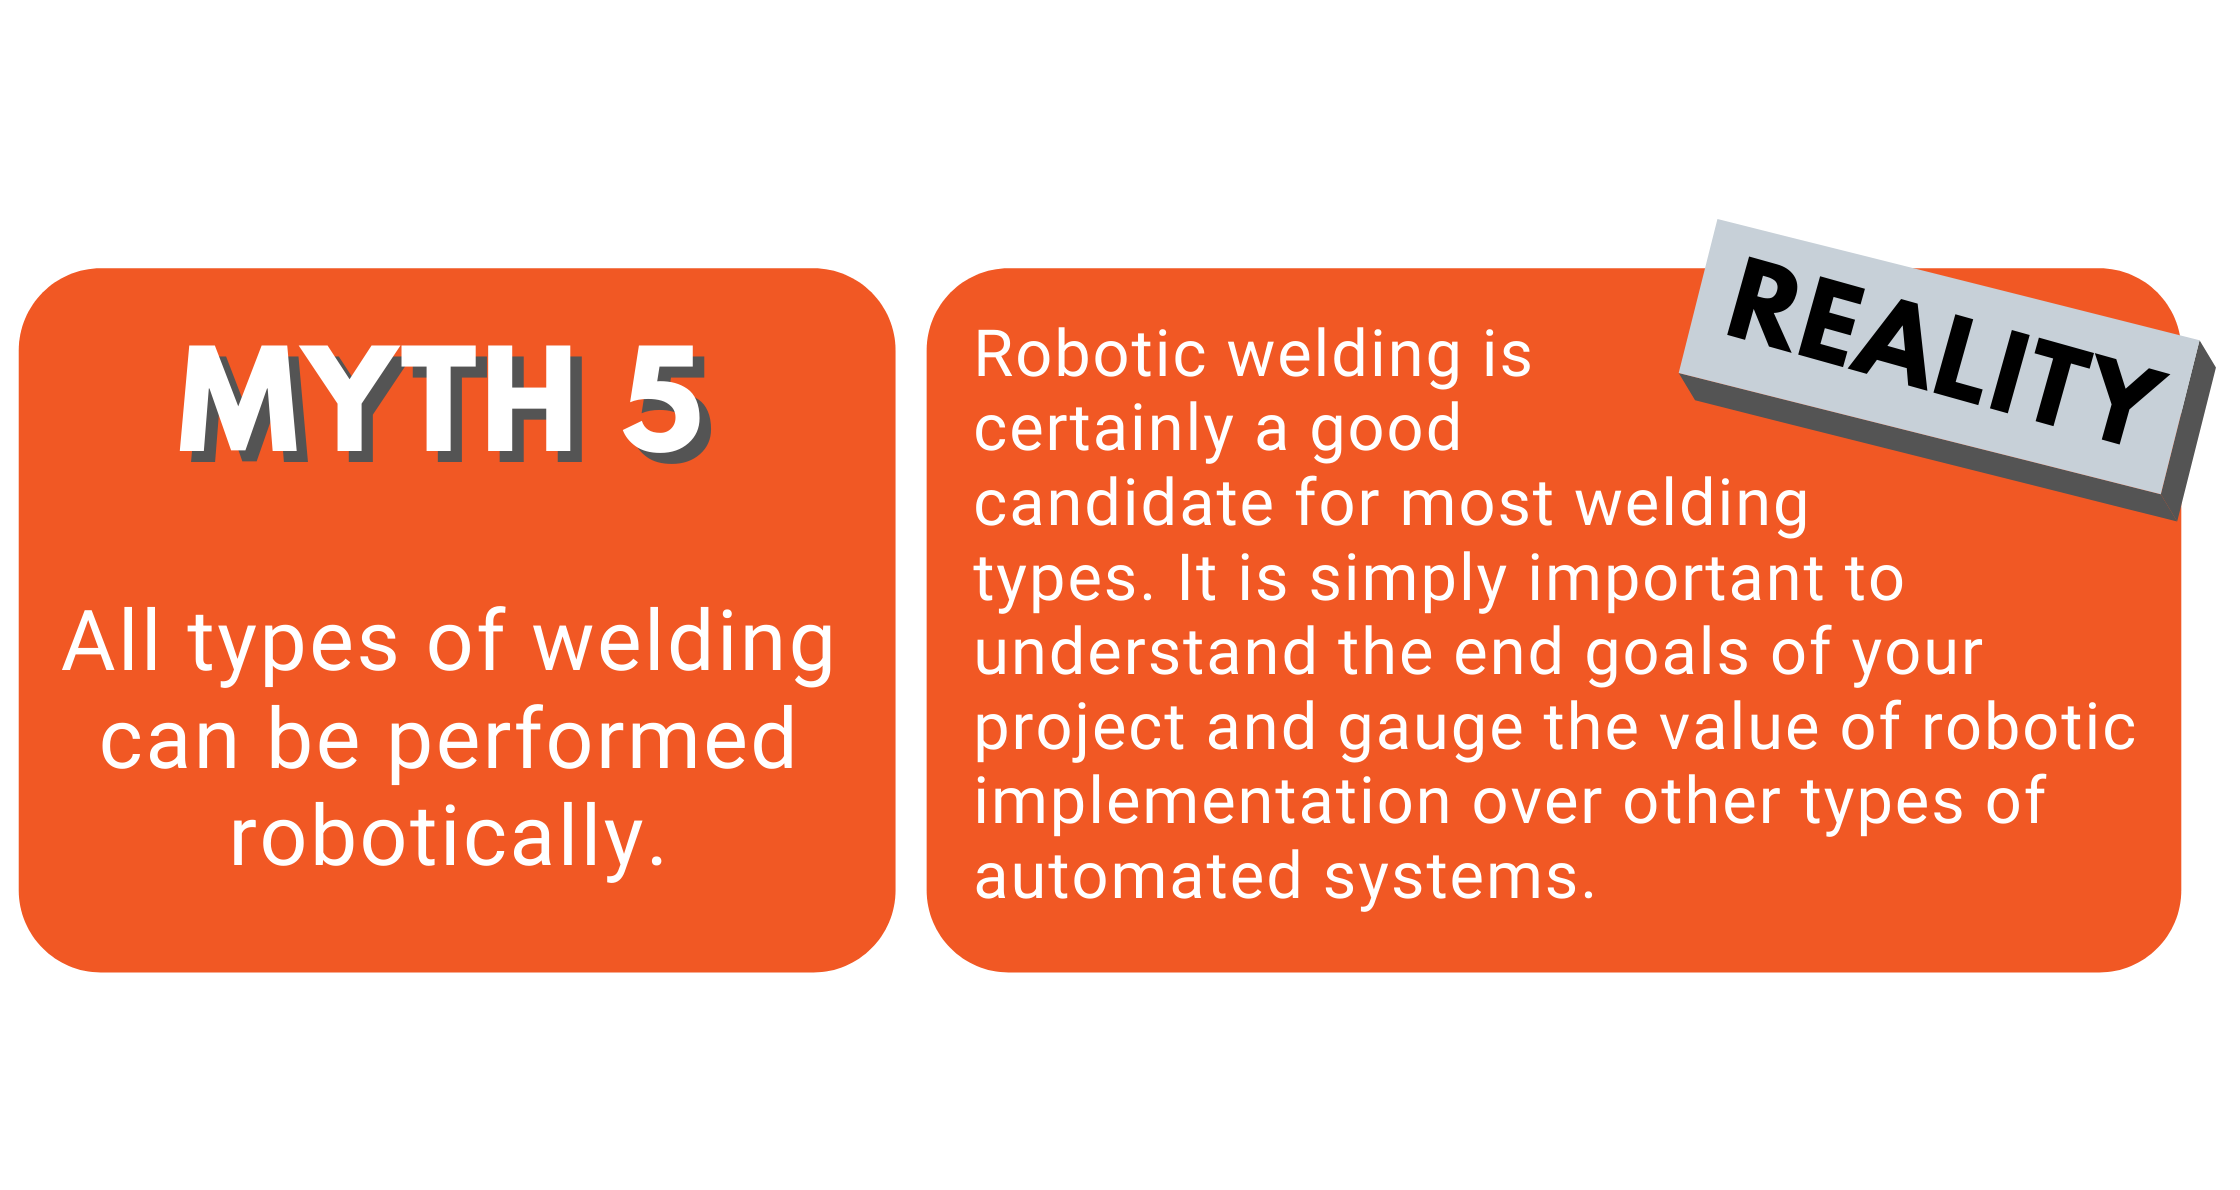 Welding Automation improves safety (7)